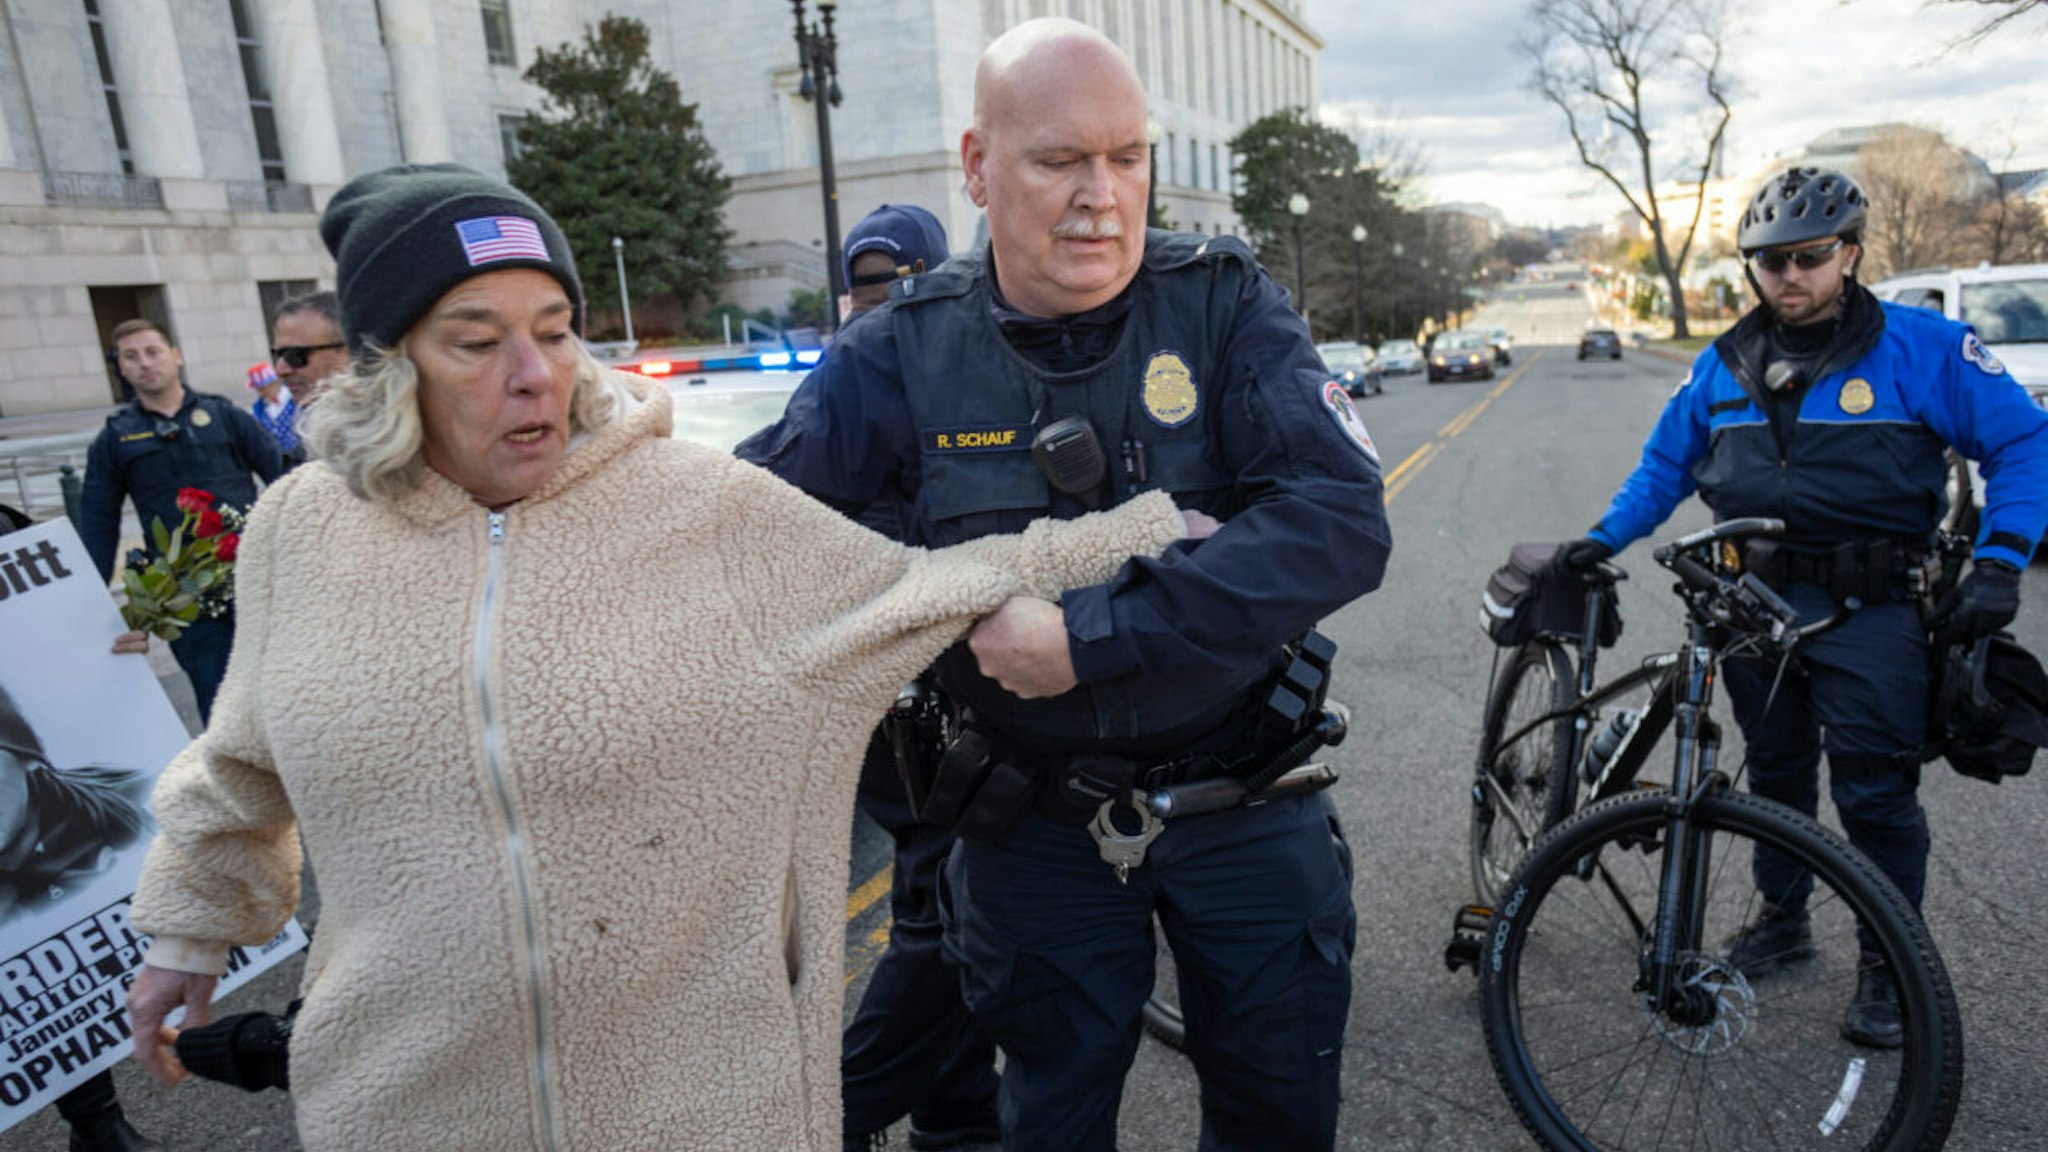 Micki Witthoeft, the mother of Ashli Babbitt, was arrested while walking in the street around the U.S. Capitol on January 6, 2023, the two year anniversary of the death of her daughter, the pro-Trump rioter who was killed when she stormed the U.S. Capitol.